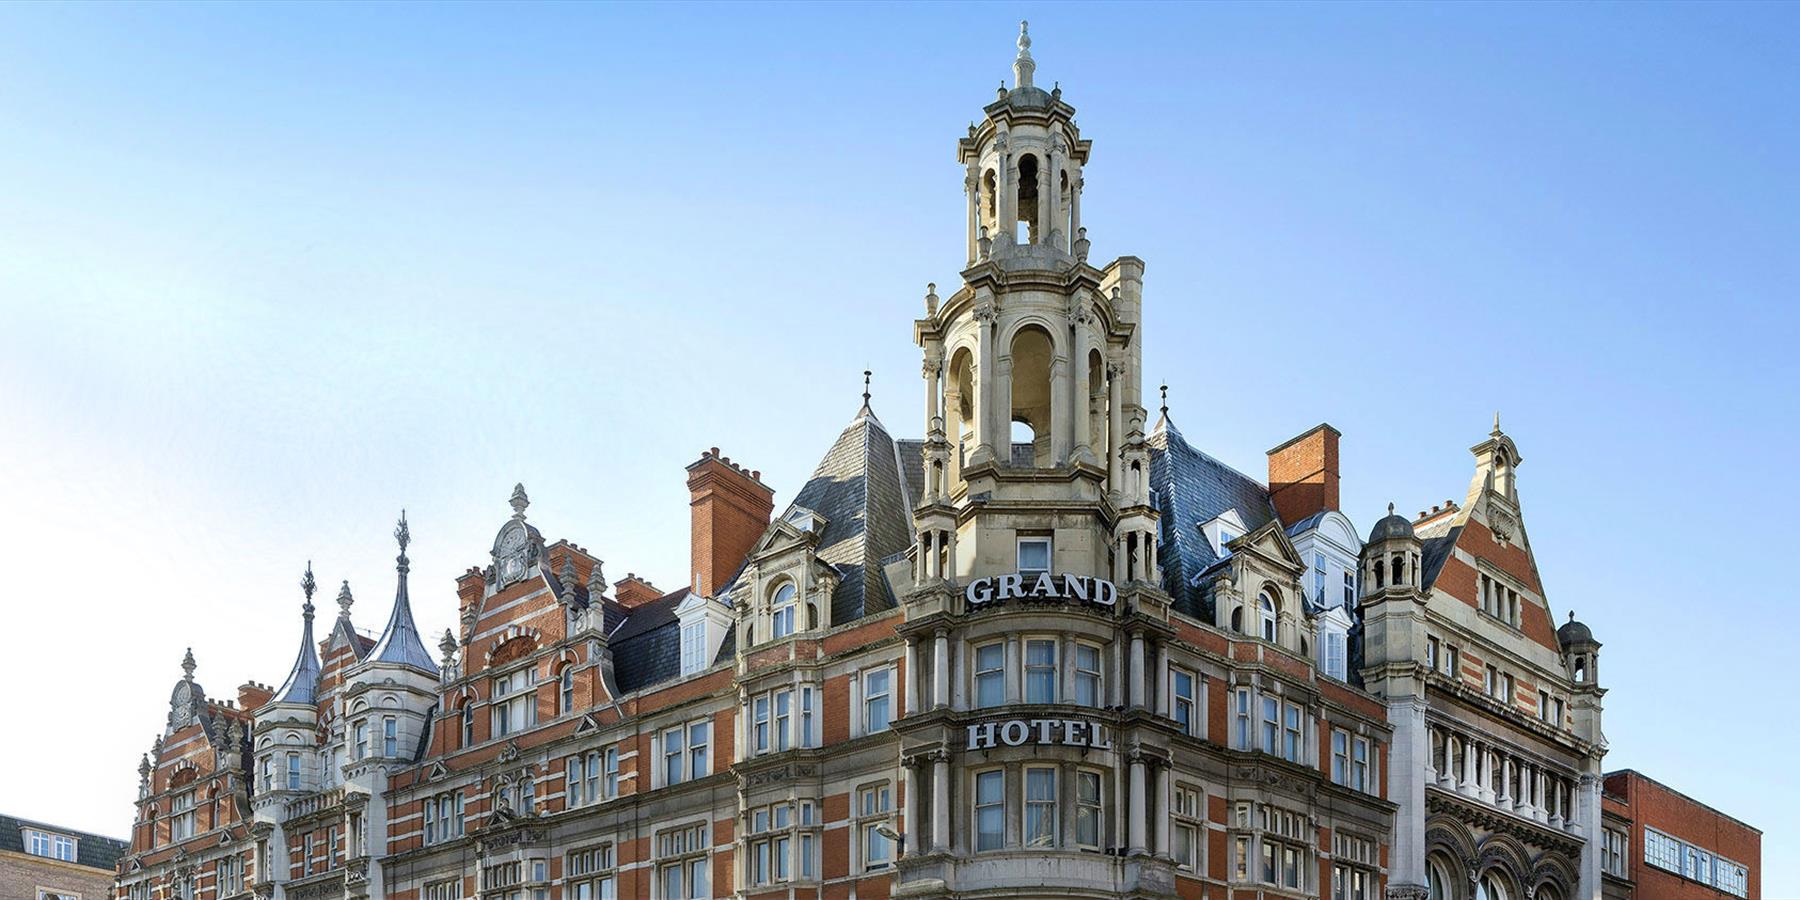 The grand hotel leicester